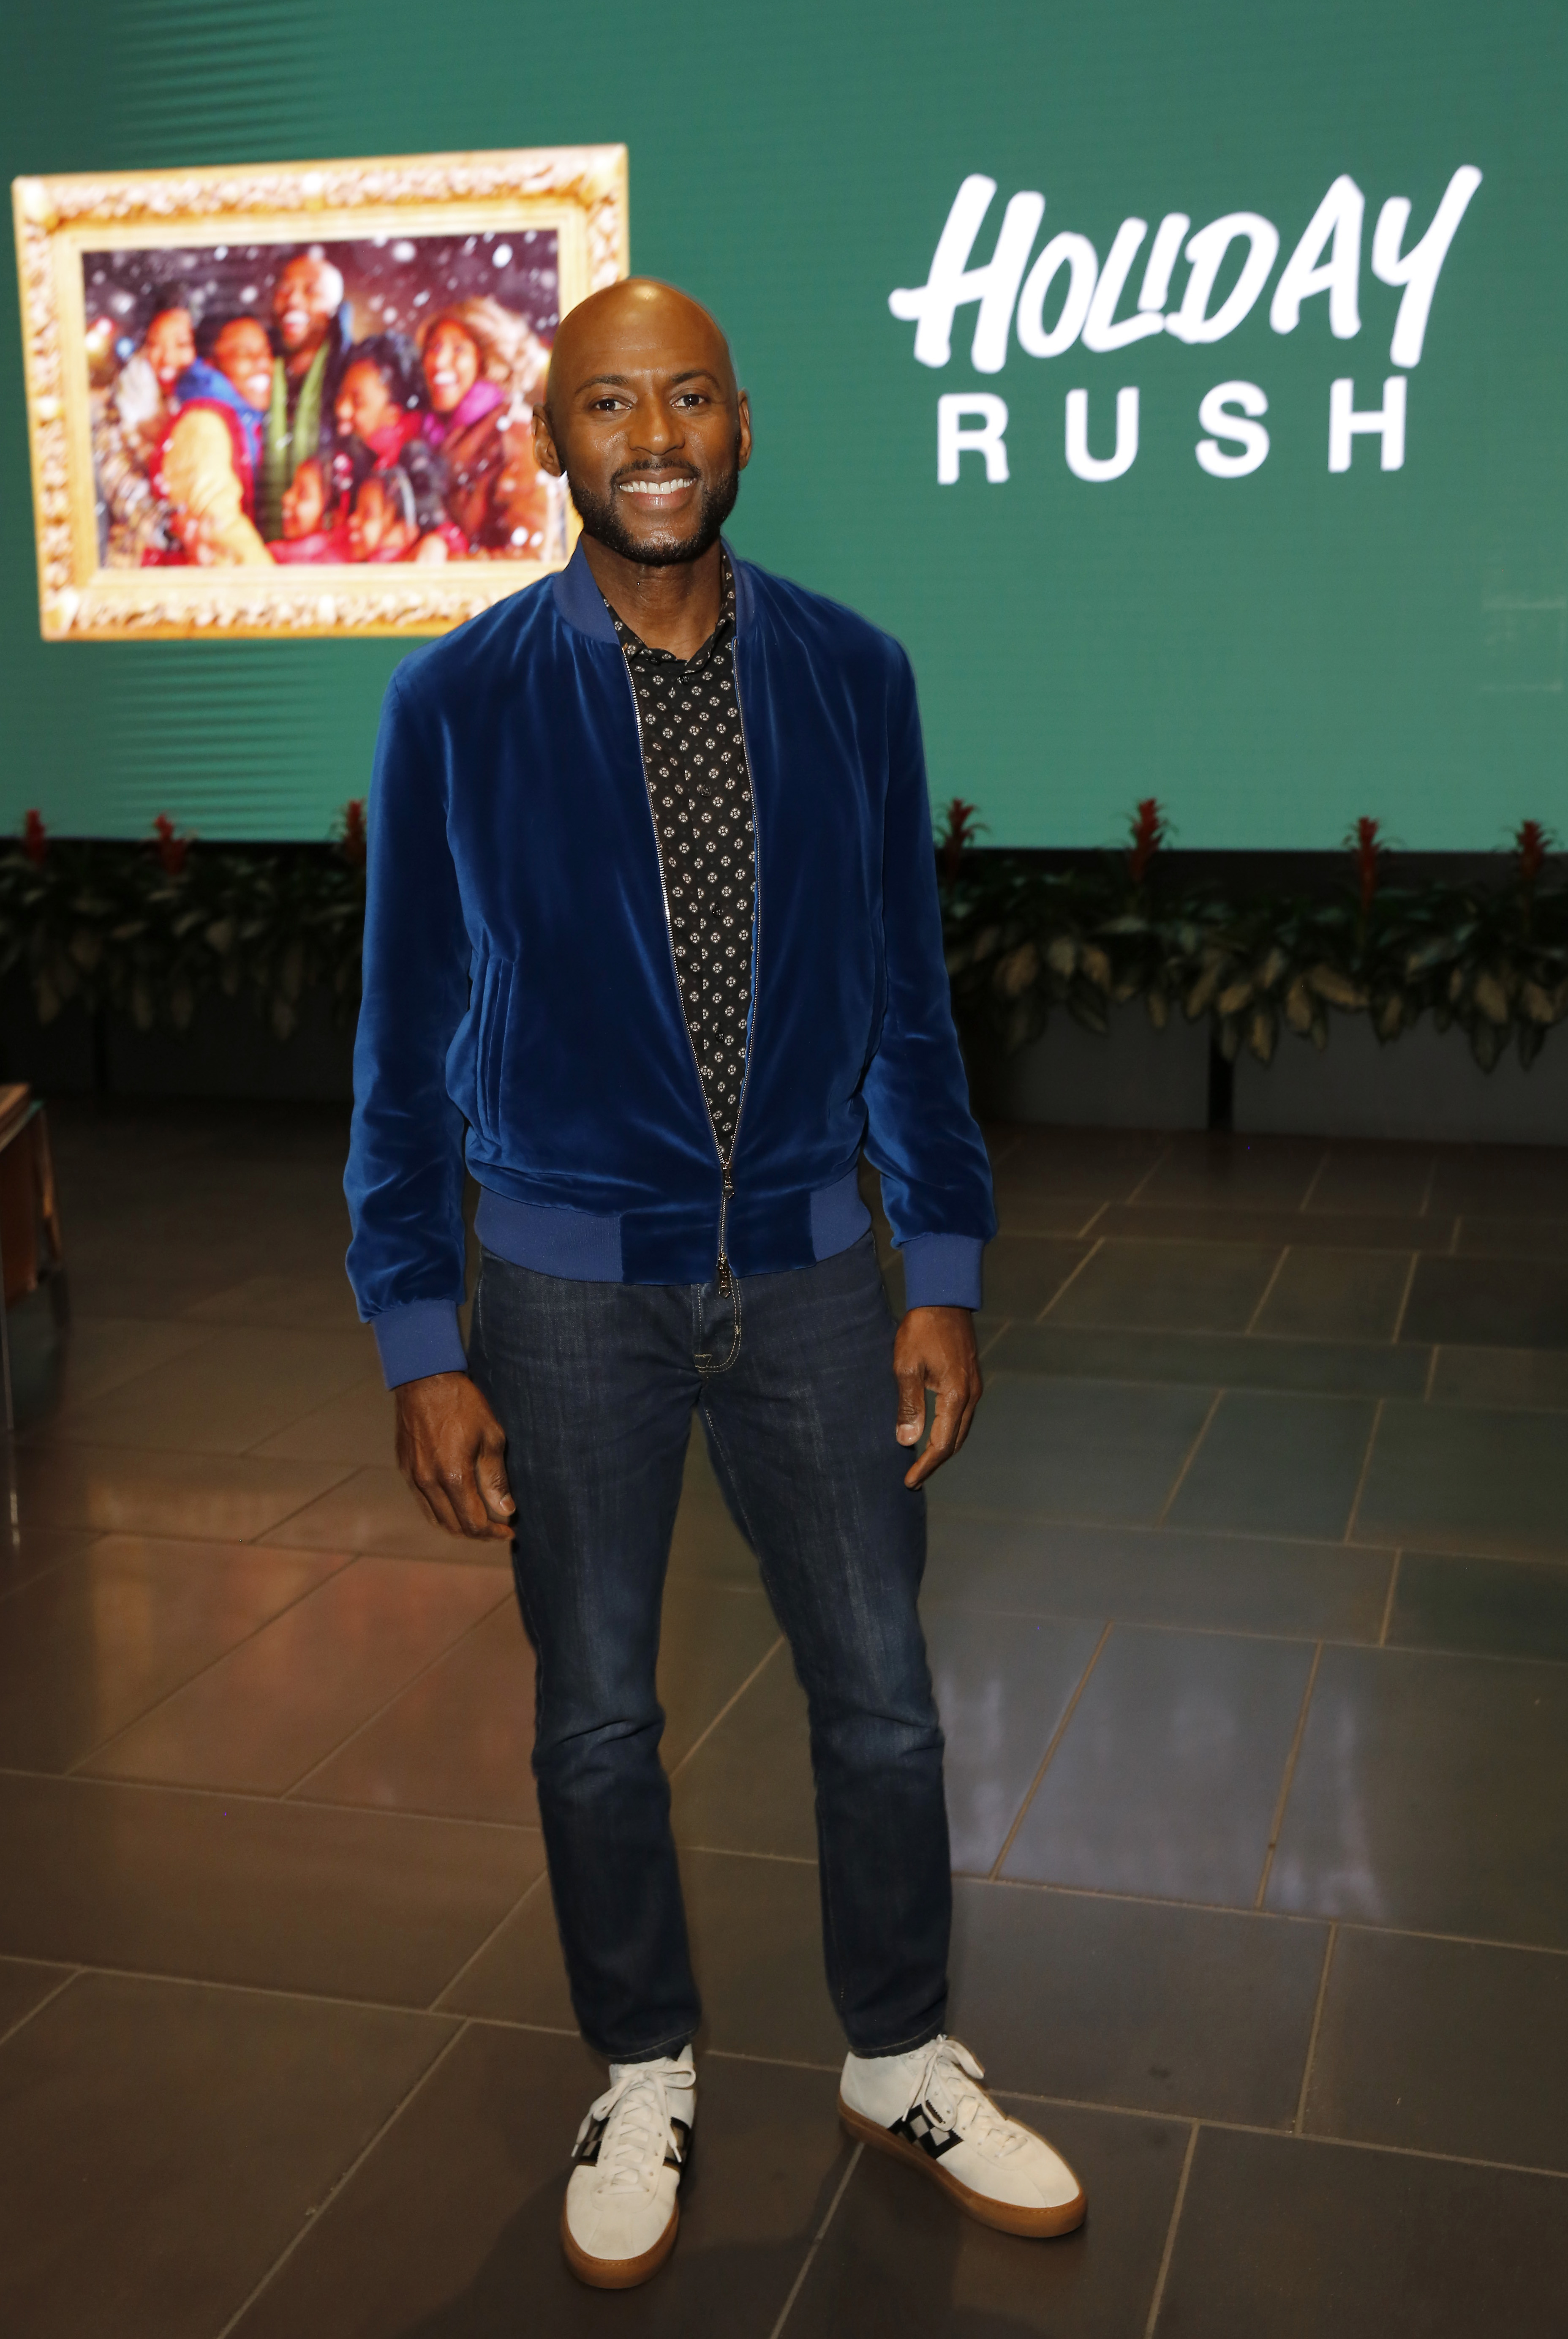 Romany Malco at the cast and crew screening of Netflix's "Holiday Rush" on November 16, 2019, in Los Angeles, California. | Source: Getty Images